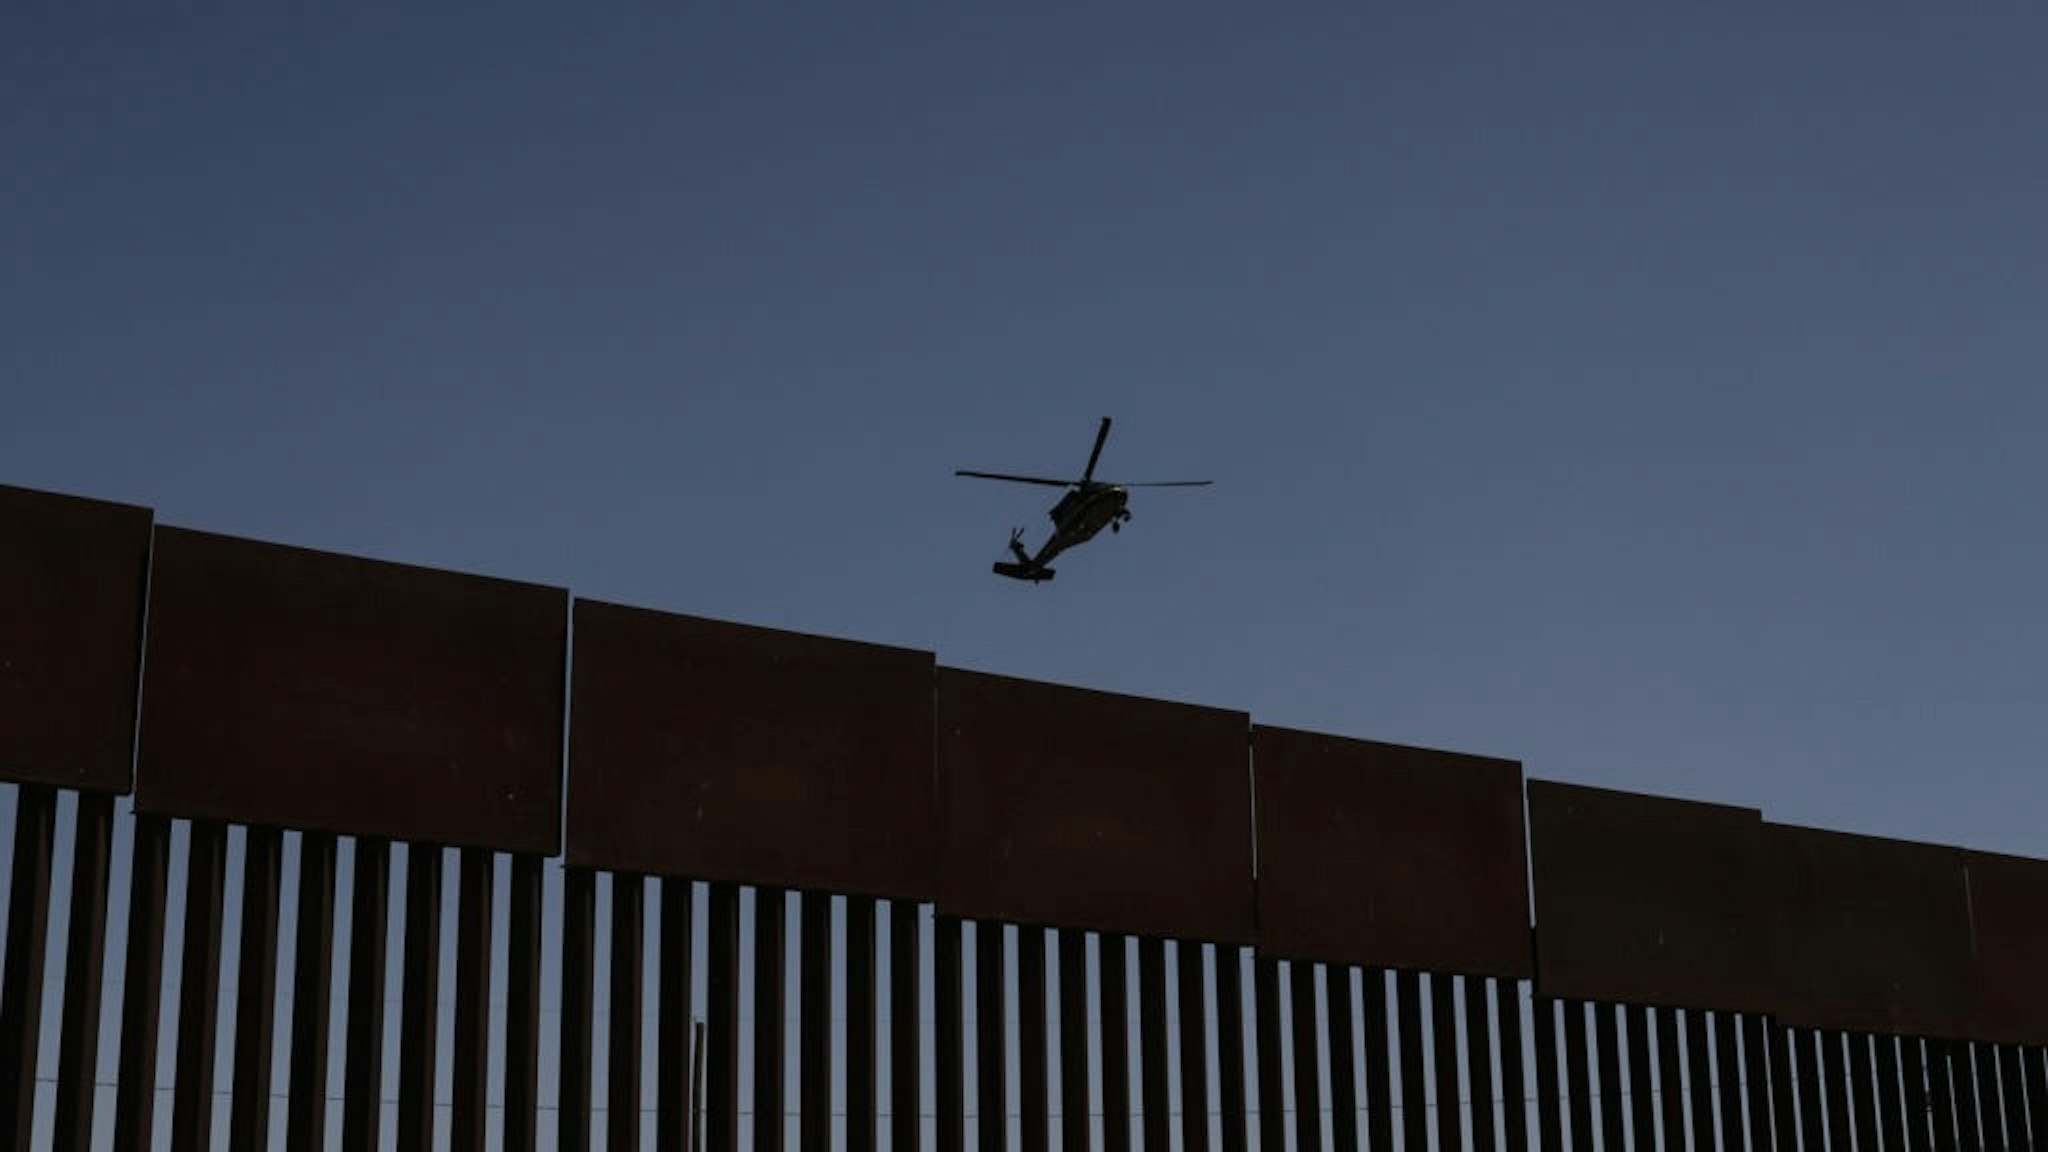 Mexico Faces Migrant Crisis With Few Resources A helicopter flies above a section of the U.S. and Mexico border wall in Ciudad Juarez, Mexico, on Wednesday, May 19, 2021. Shelters across Mexico are packed, amid reduced capacity because of the pandemic, and groups providing food and medical care strain to meet an acute need as the number of migrants grow, reports the Los Angeles Times. Photographer: Jonathan Alpeyrie/BloombergContributor via Getty Images